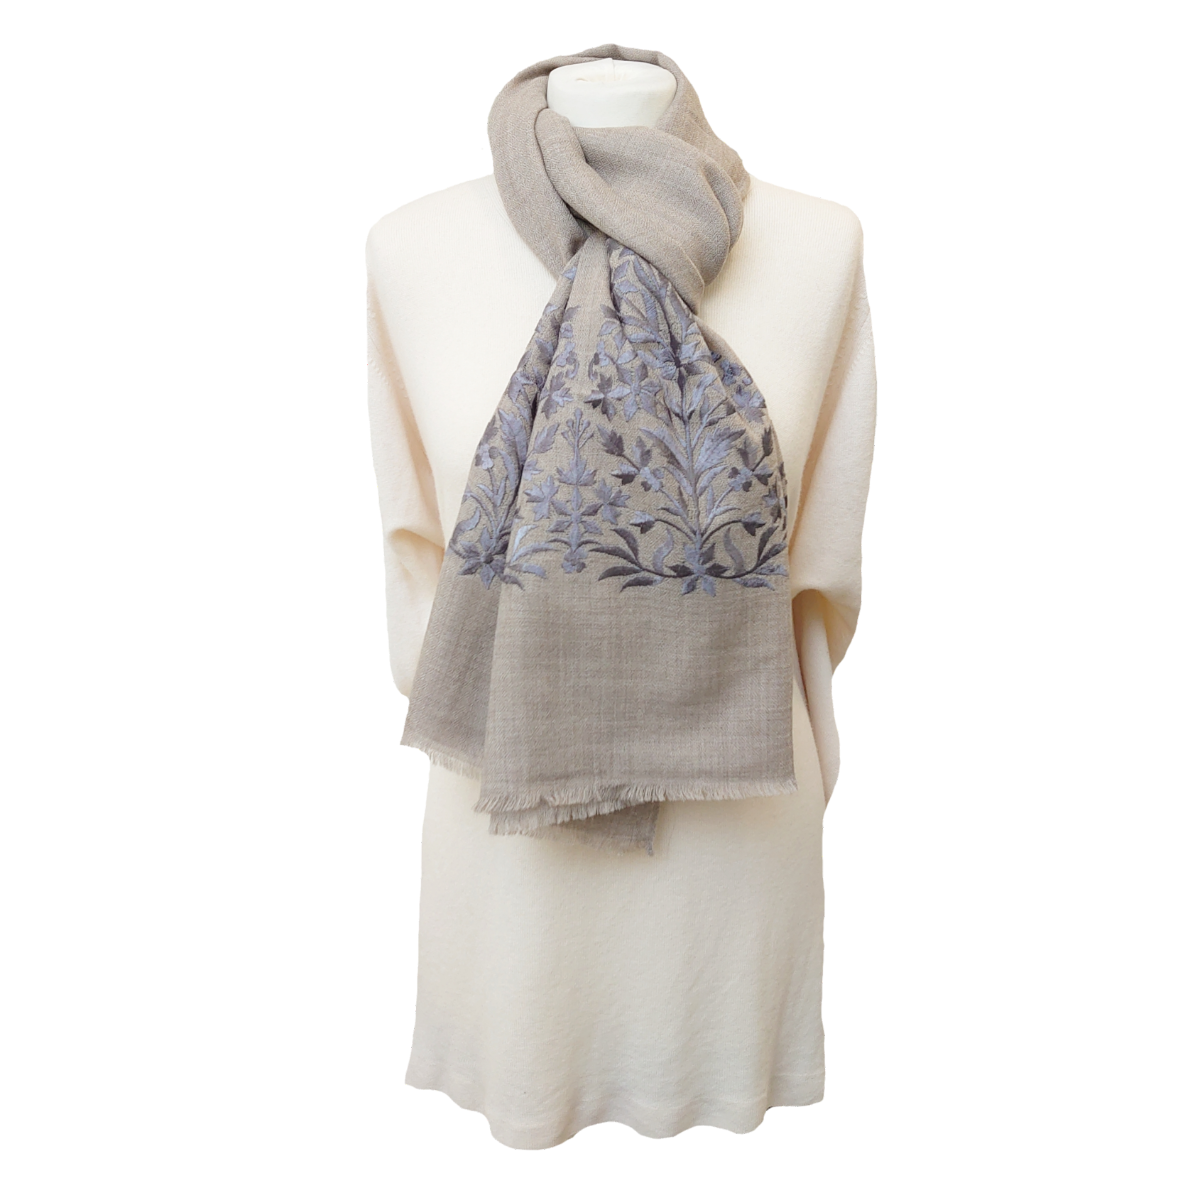 Limited Edition Fine Pashmina Stole With Embroidered Ends - Stone-Light Blue